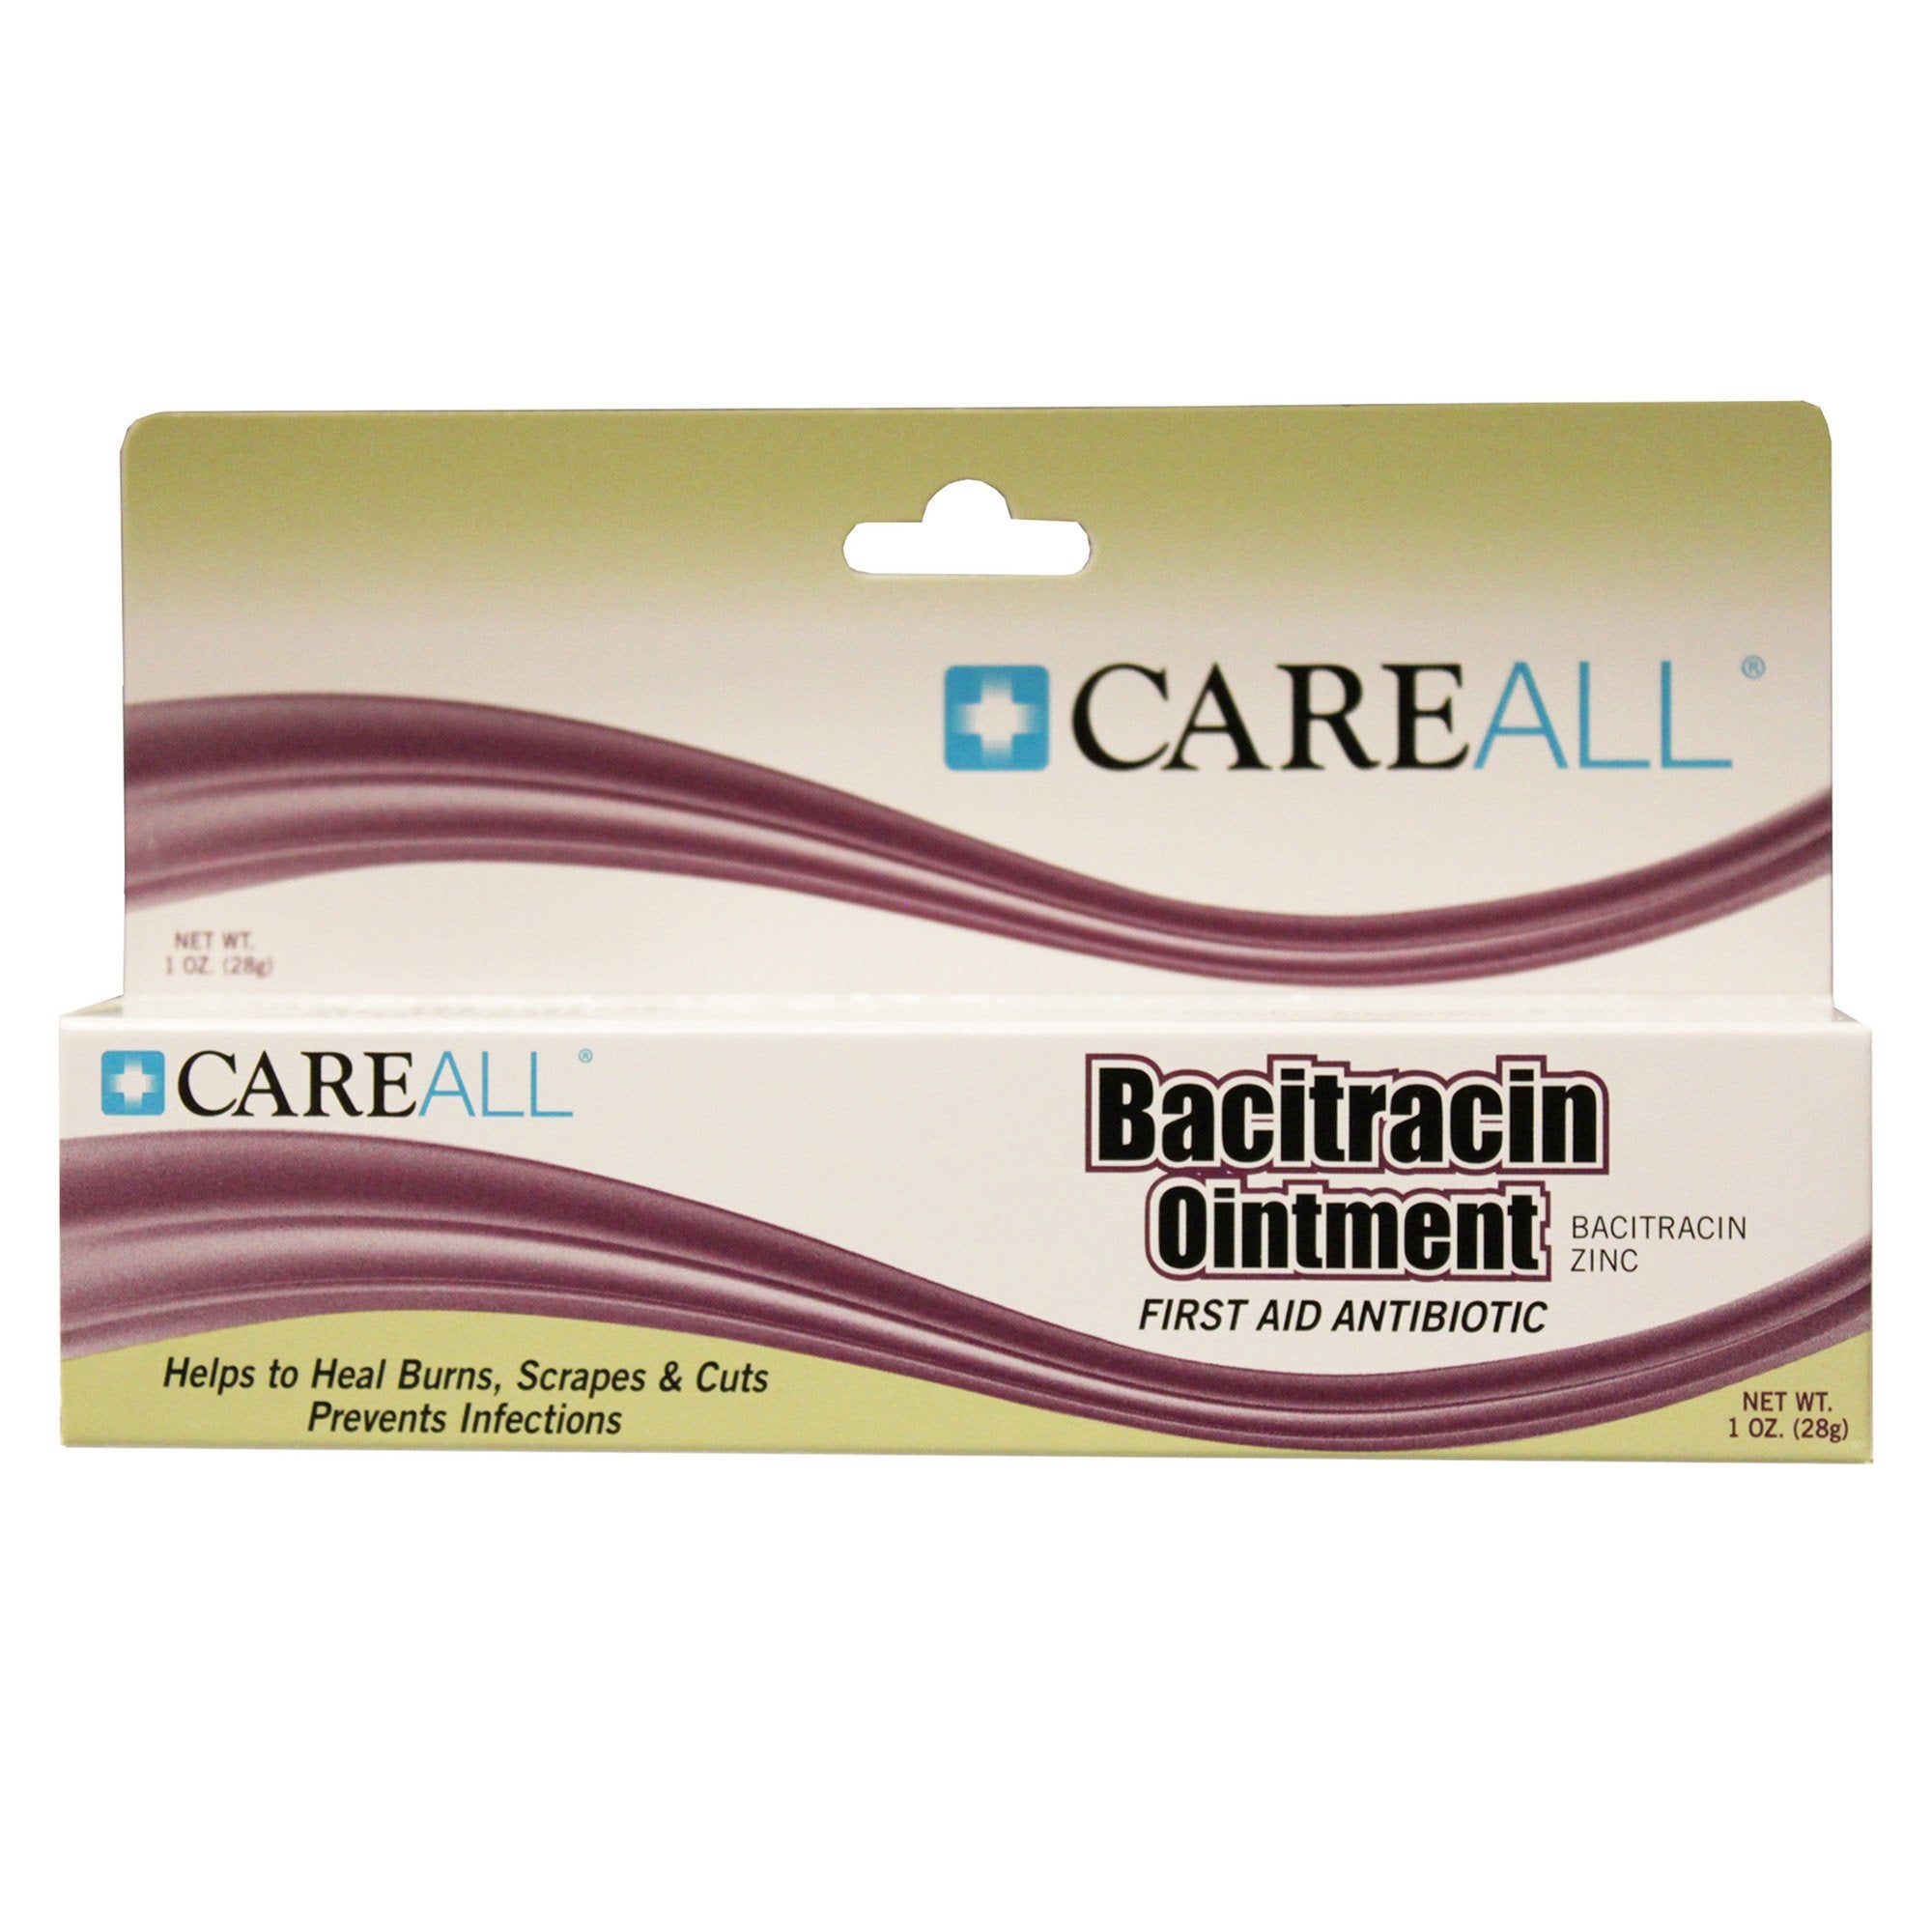 First Aid Antibiotic CareALL Ointment 1 oz. Tube